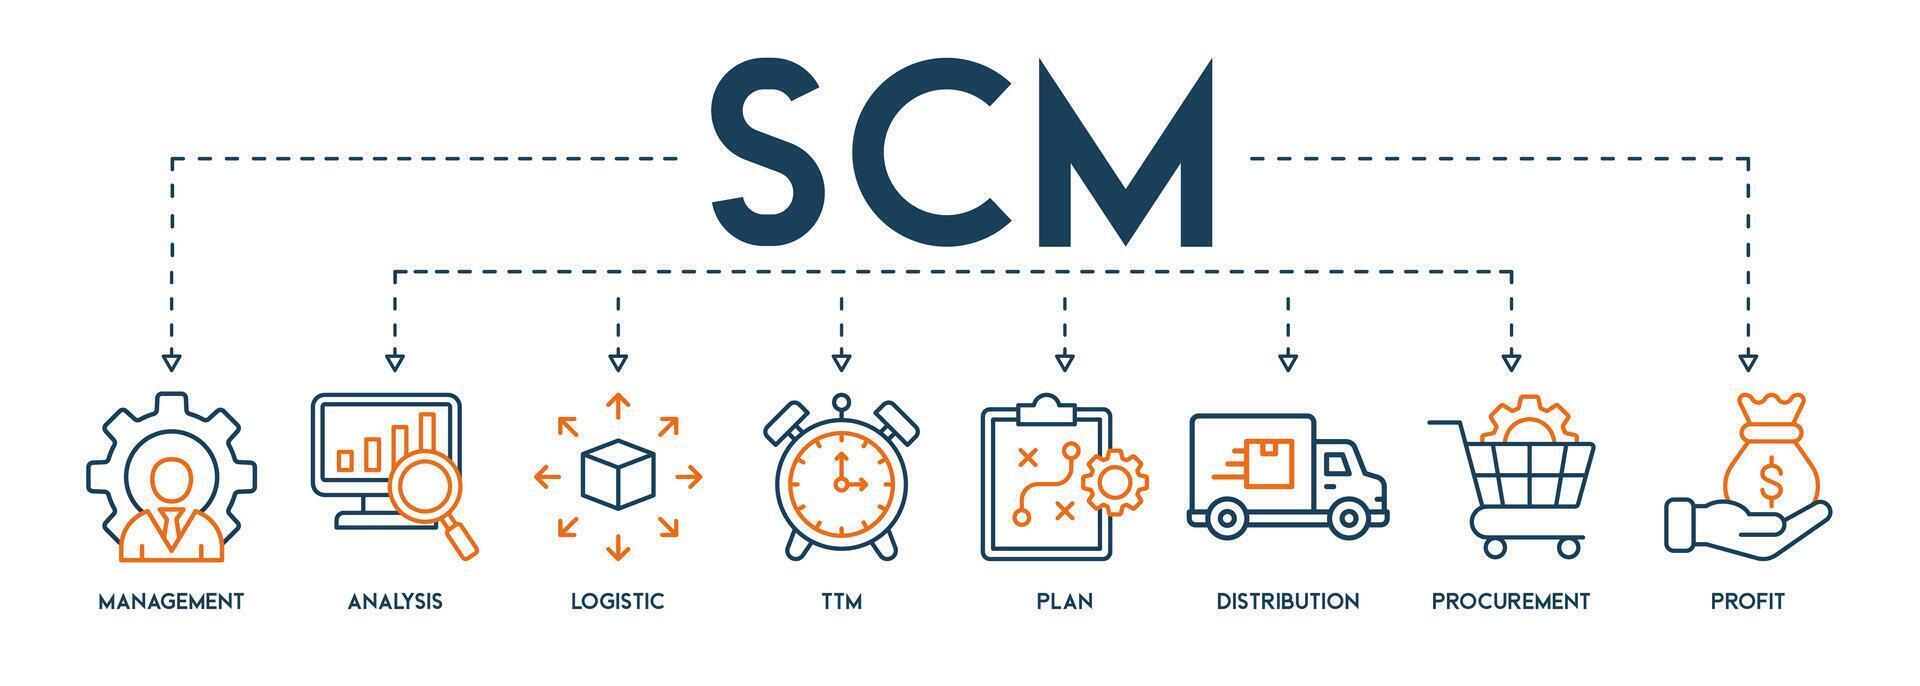 SCM banner web icon vector illustration concept for Supply Chain Management with icon and symbol of management, analysis, logistic, ttm, plan